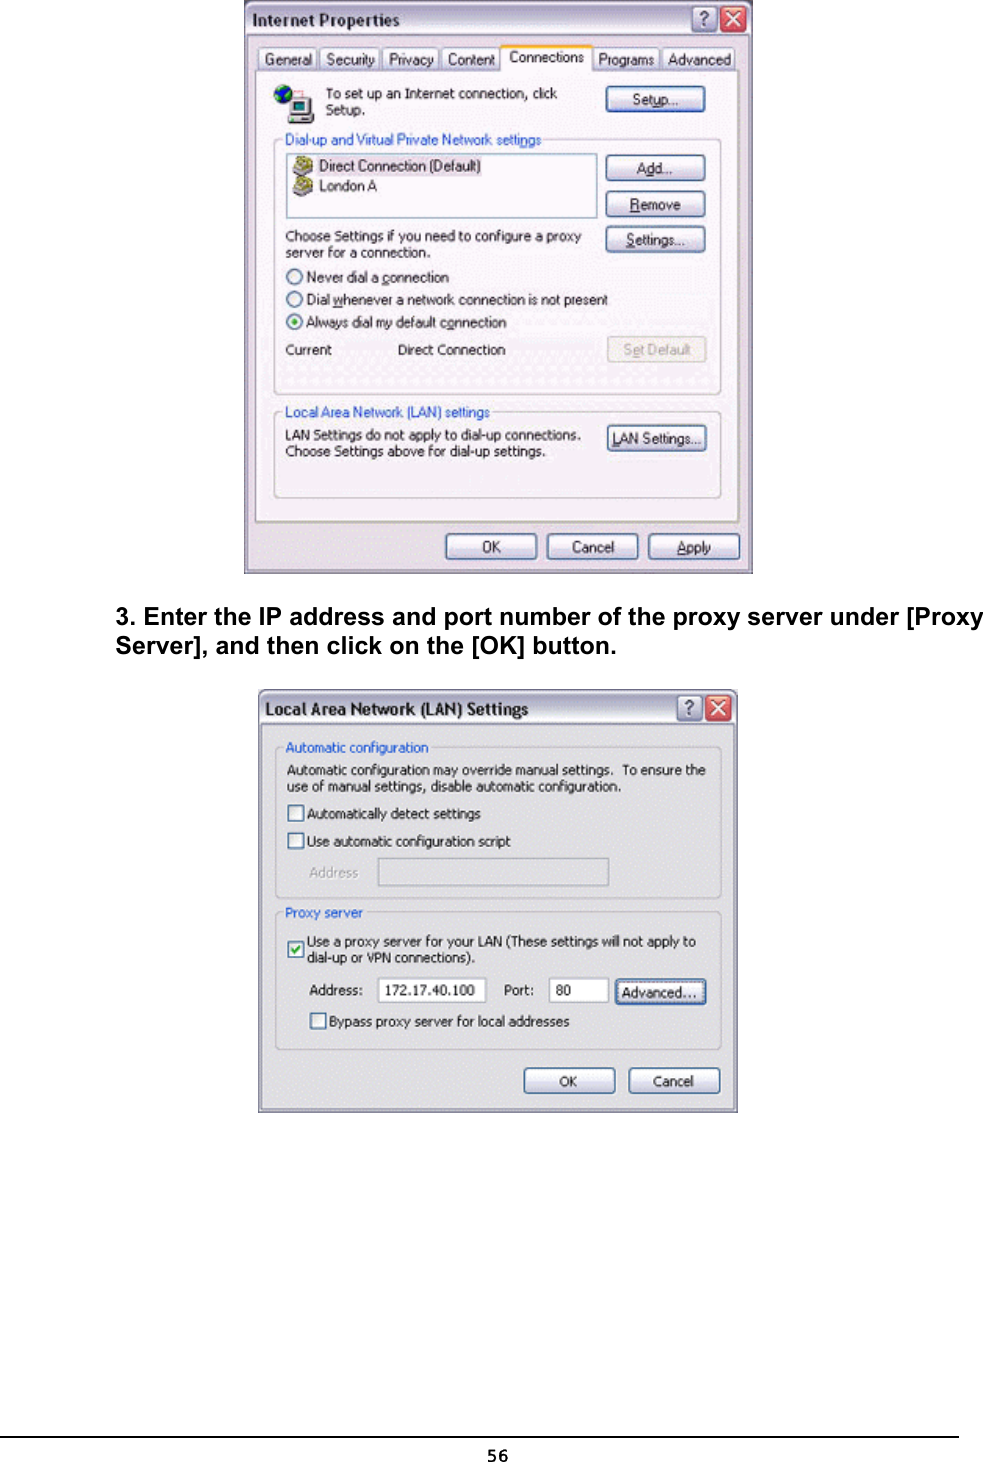   3. Enter the IP address and port number of the proxy server under [Proxy Server], and then click on the [OK] button.   56